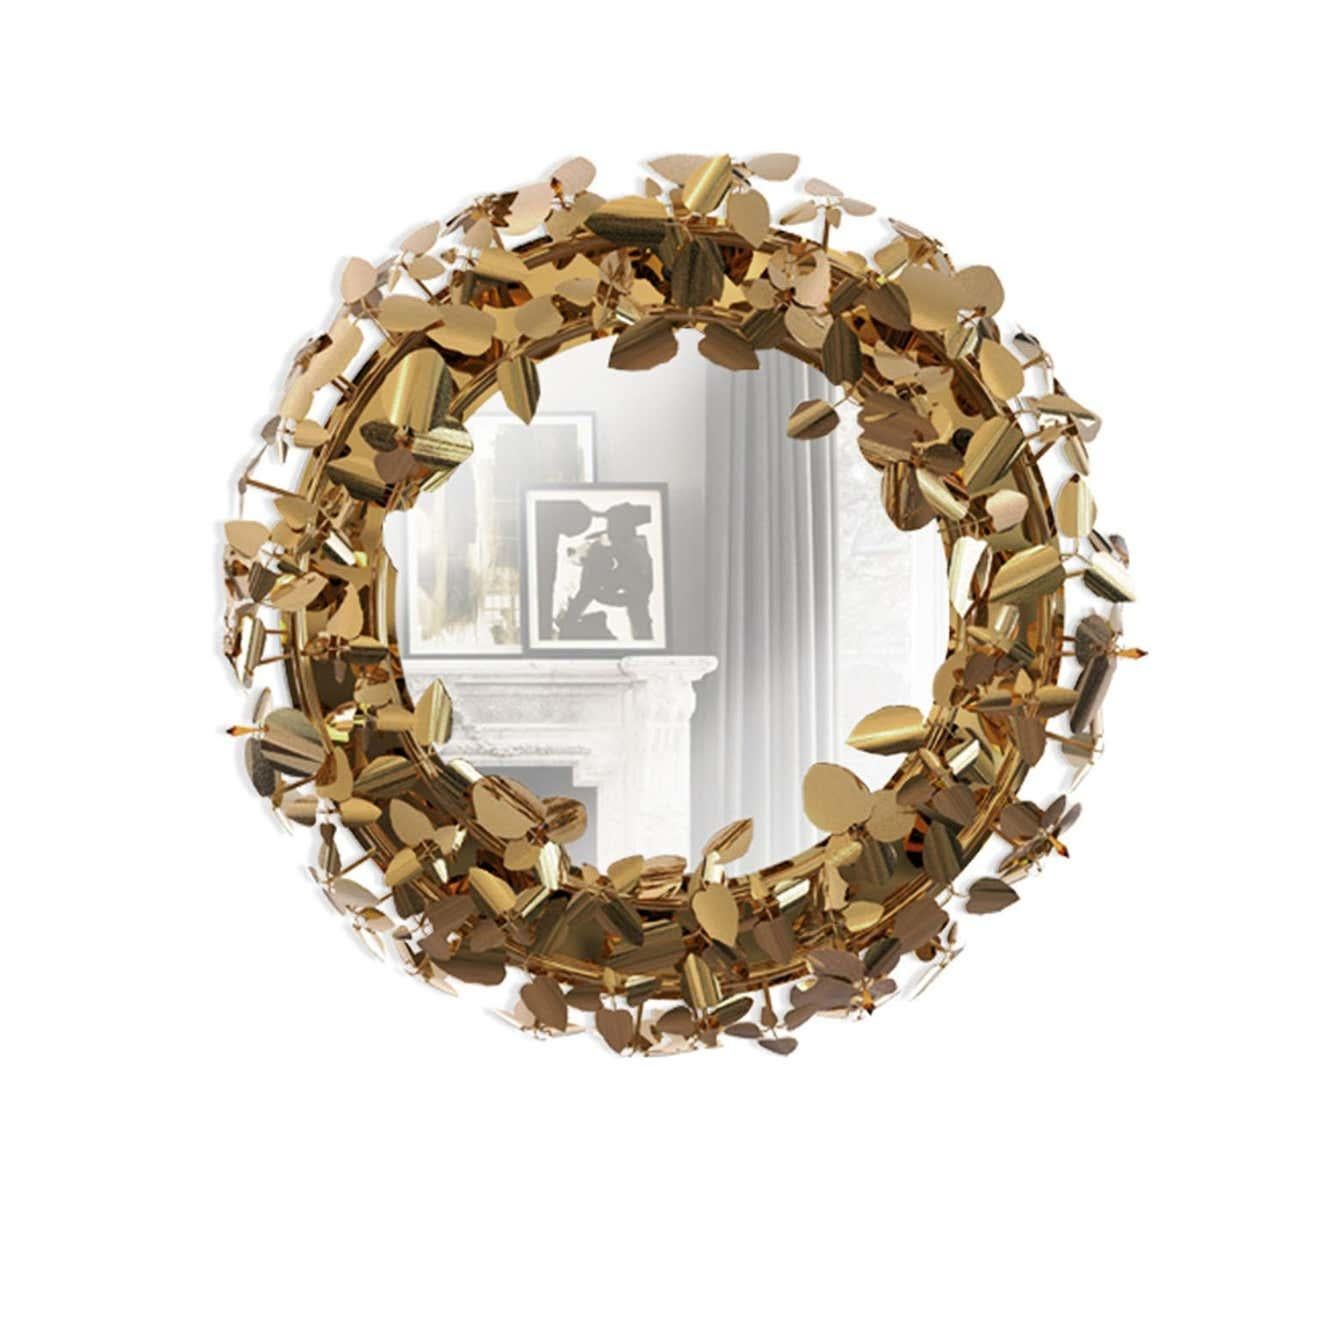 European Mirror Wreath with Lighting For Sale